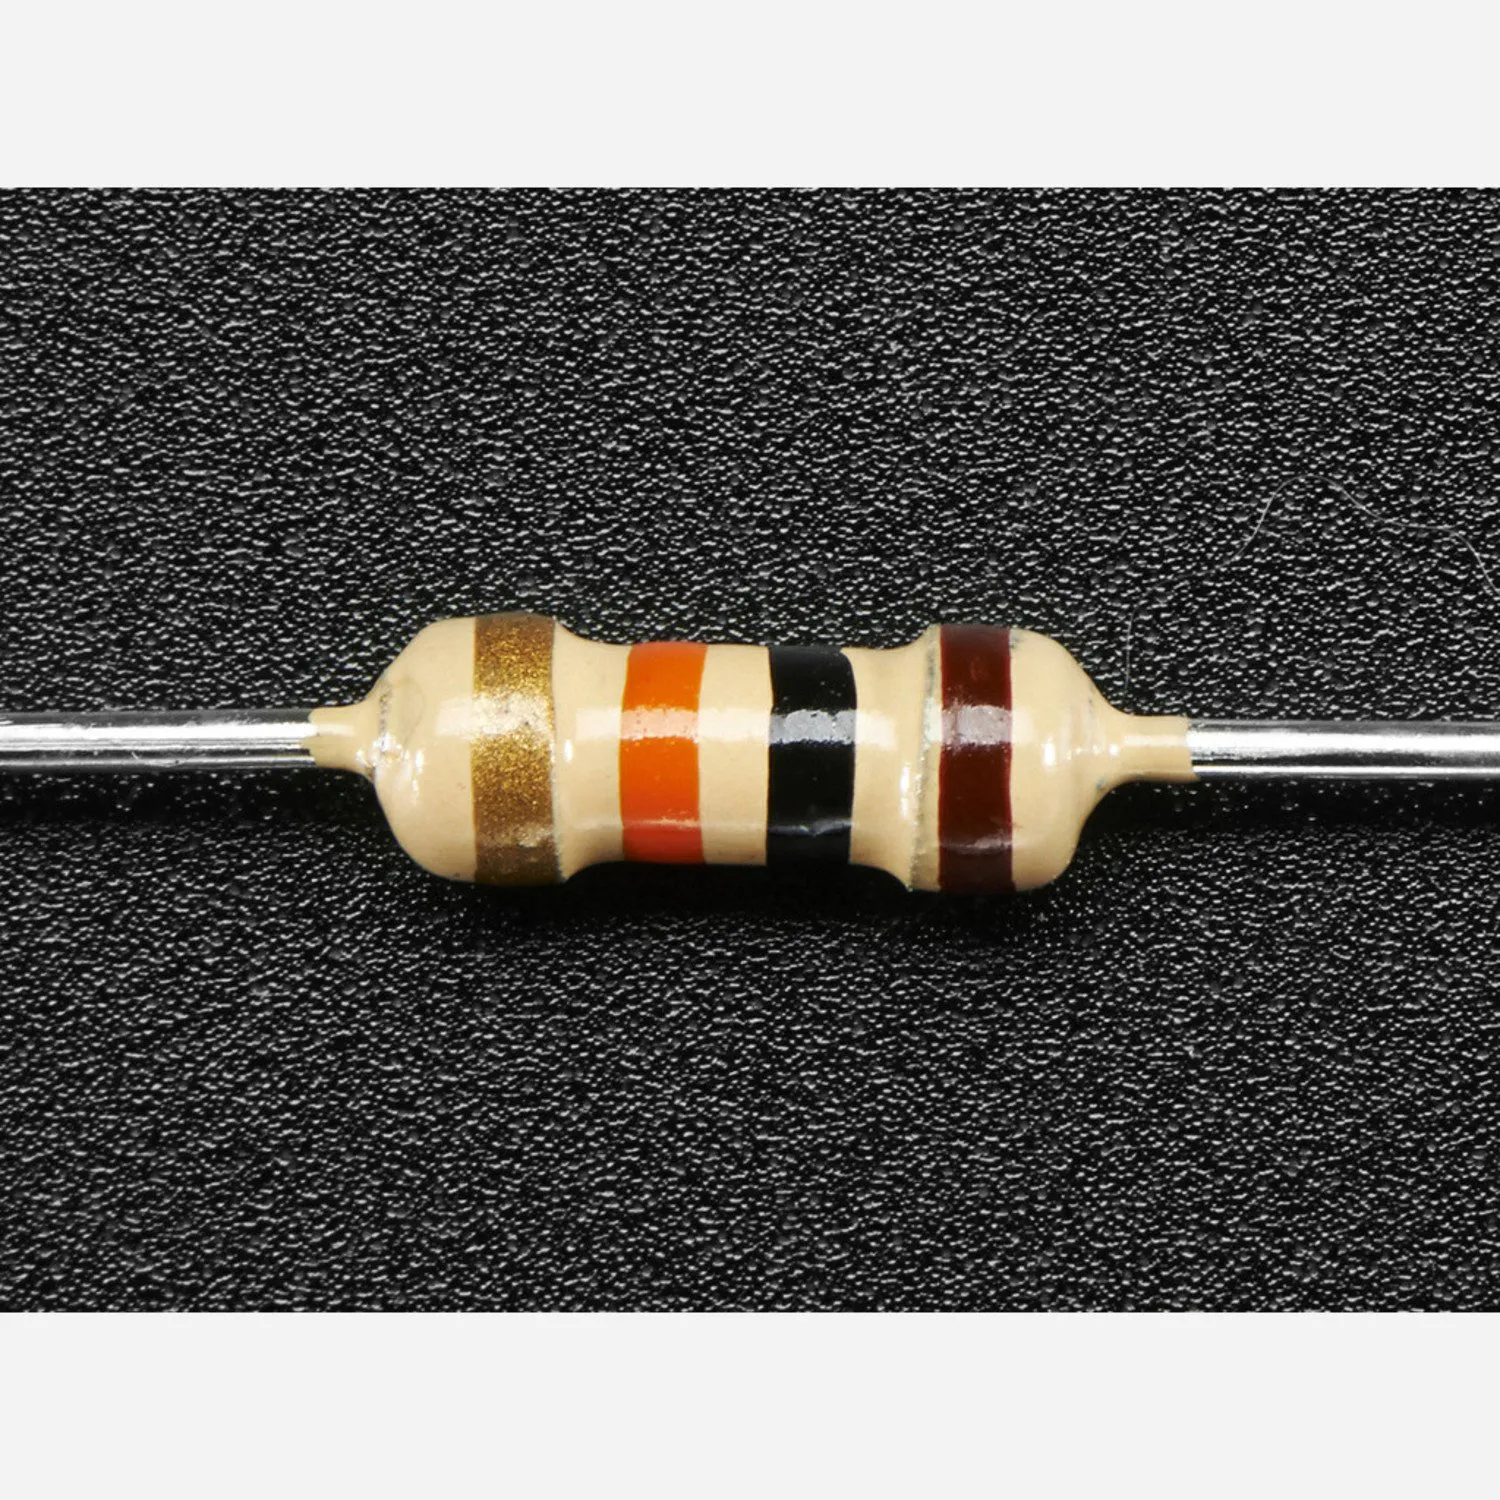 Photo of Through-Hole Resistors - 10K ohm 5% 1/4W - Pack of 25